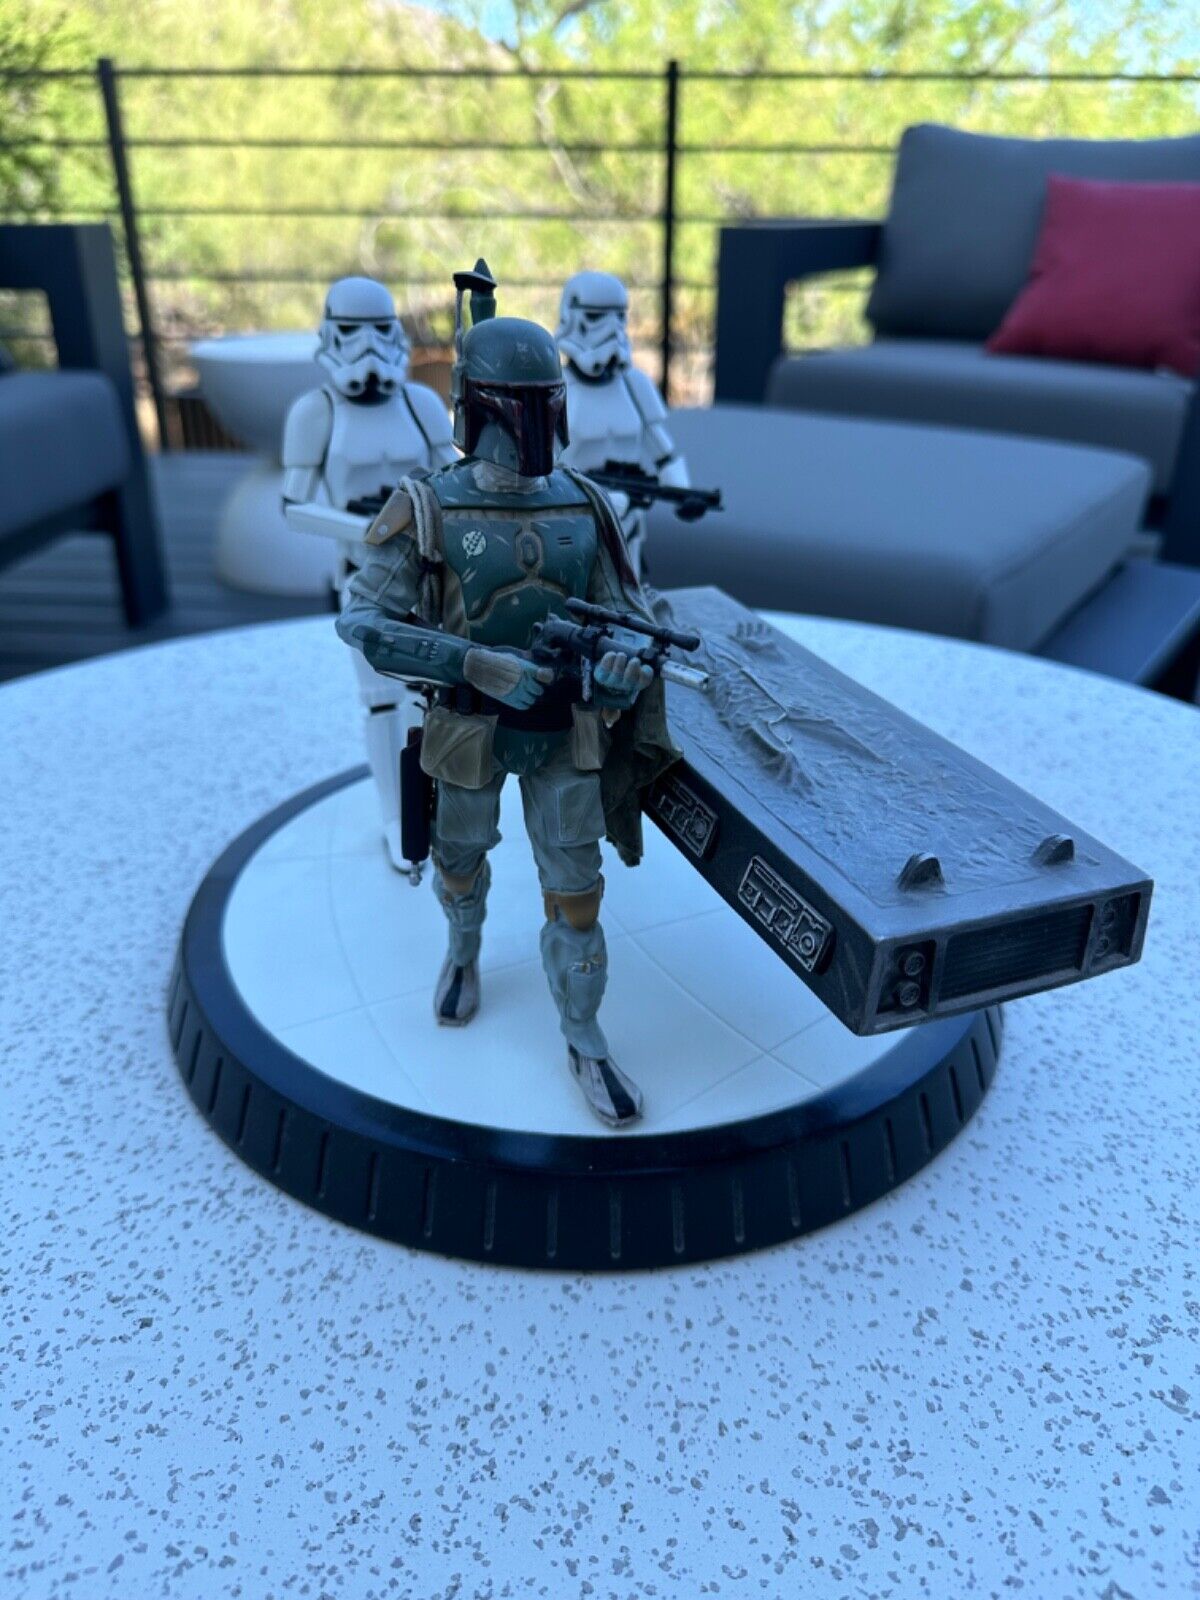 Gentle Giant Star Wars Boba Fett with Han Solo in Carbonite Limited Edition